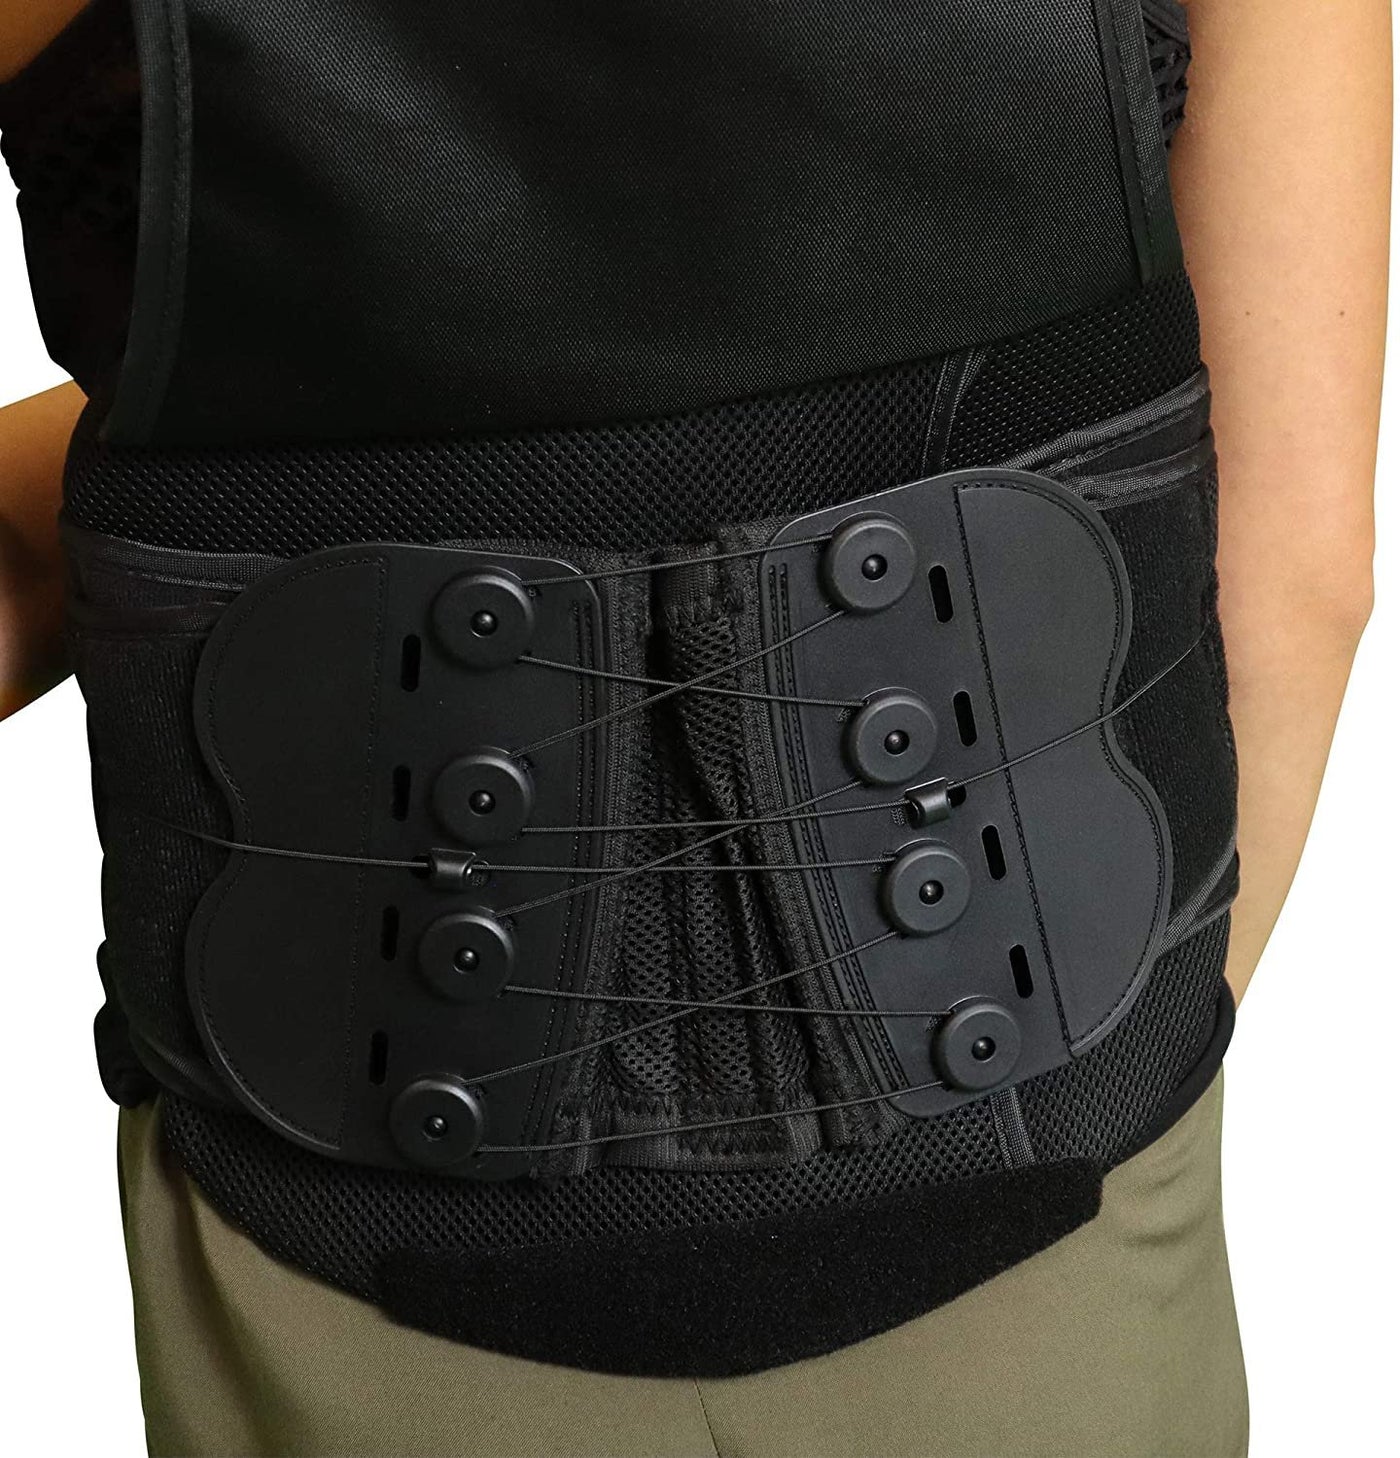 VertebrAlign LSO Lumbar Back Brace LSO0648 L0631 Pain Relief and Support for